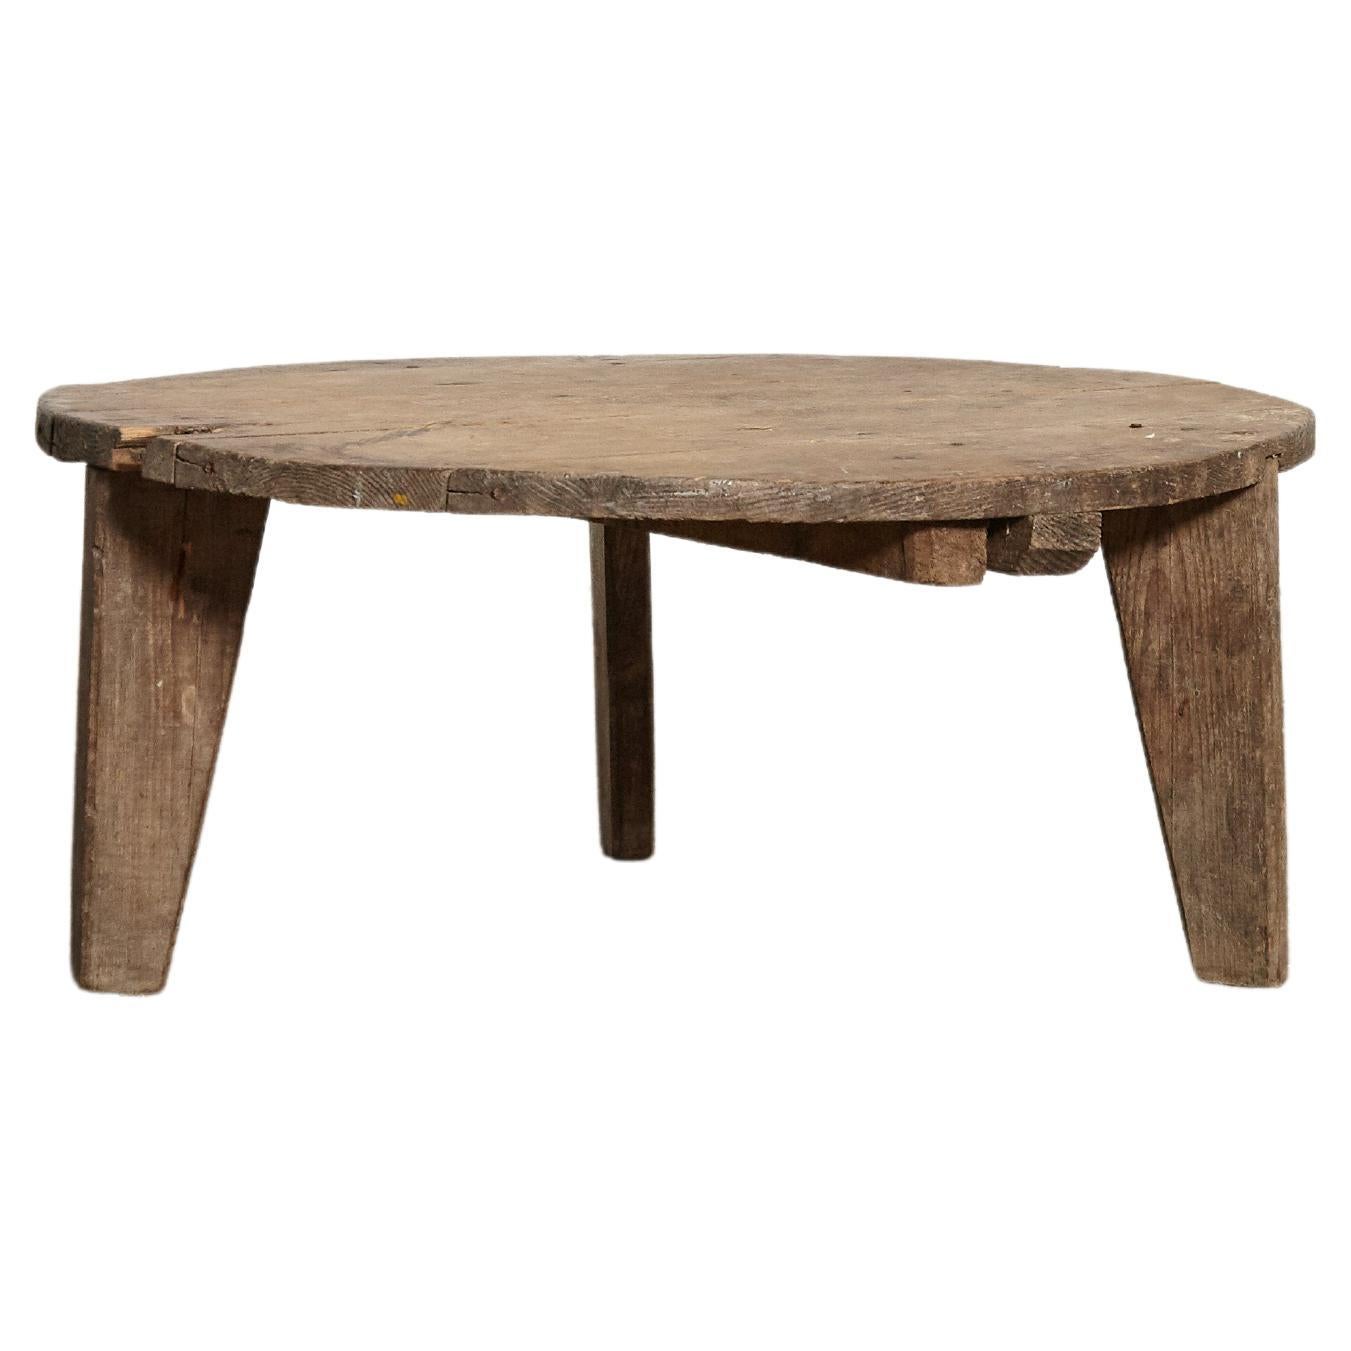 Primitive French Wooden Table, Form Reminiscent of Jean Prouvé